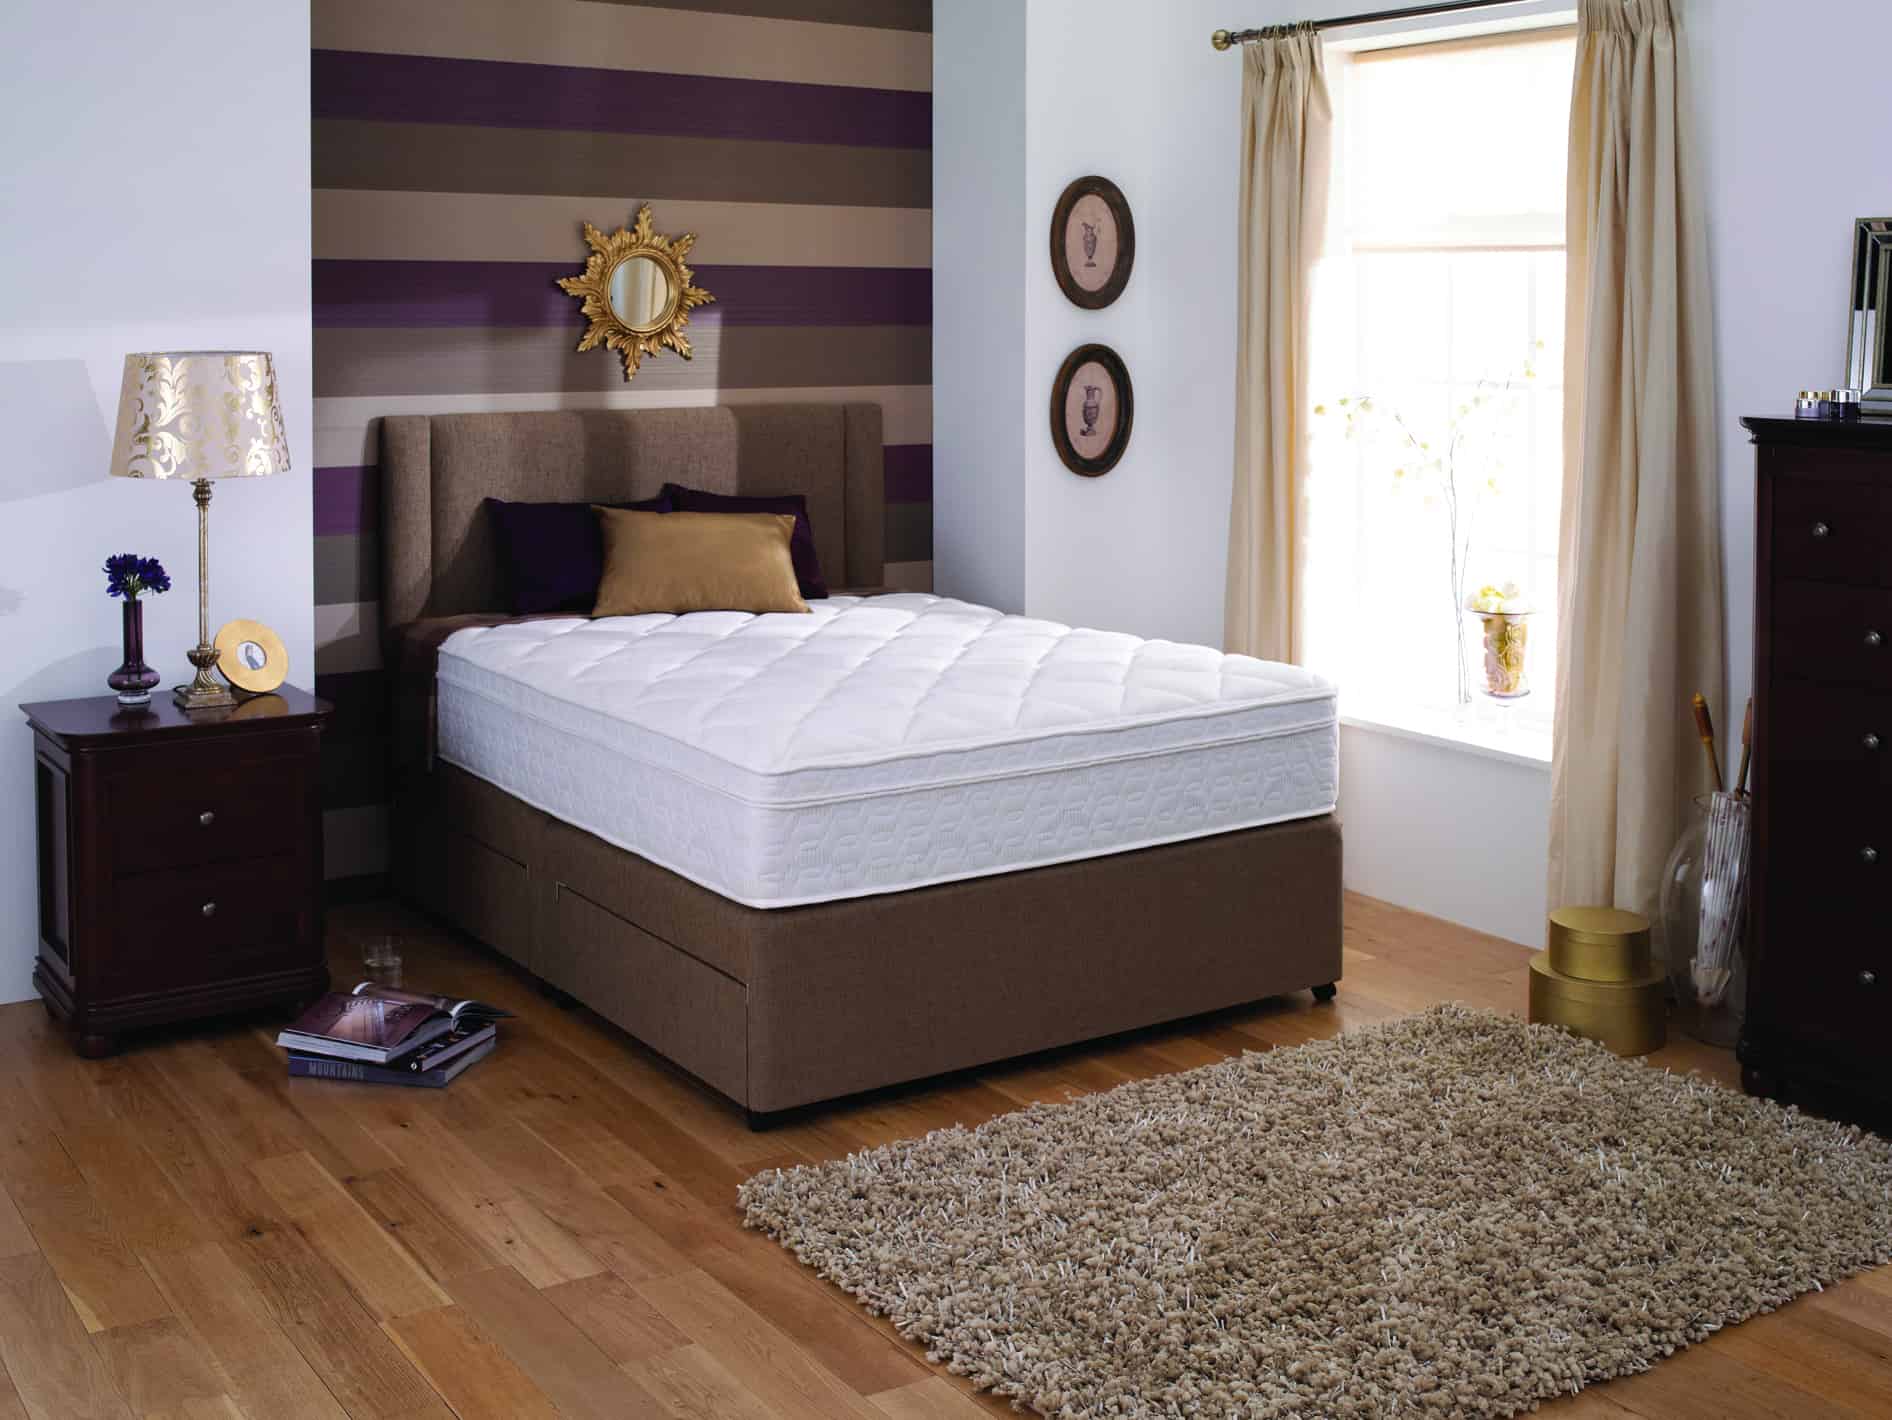 King Koil ICA Approved Mattresses at Dalzells